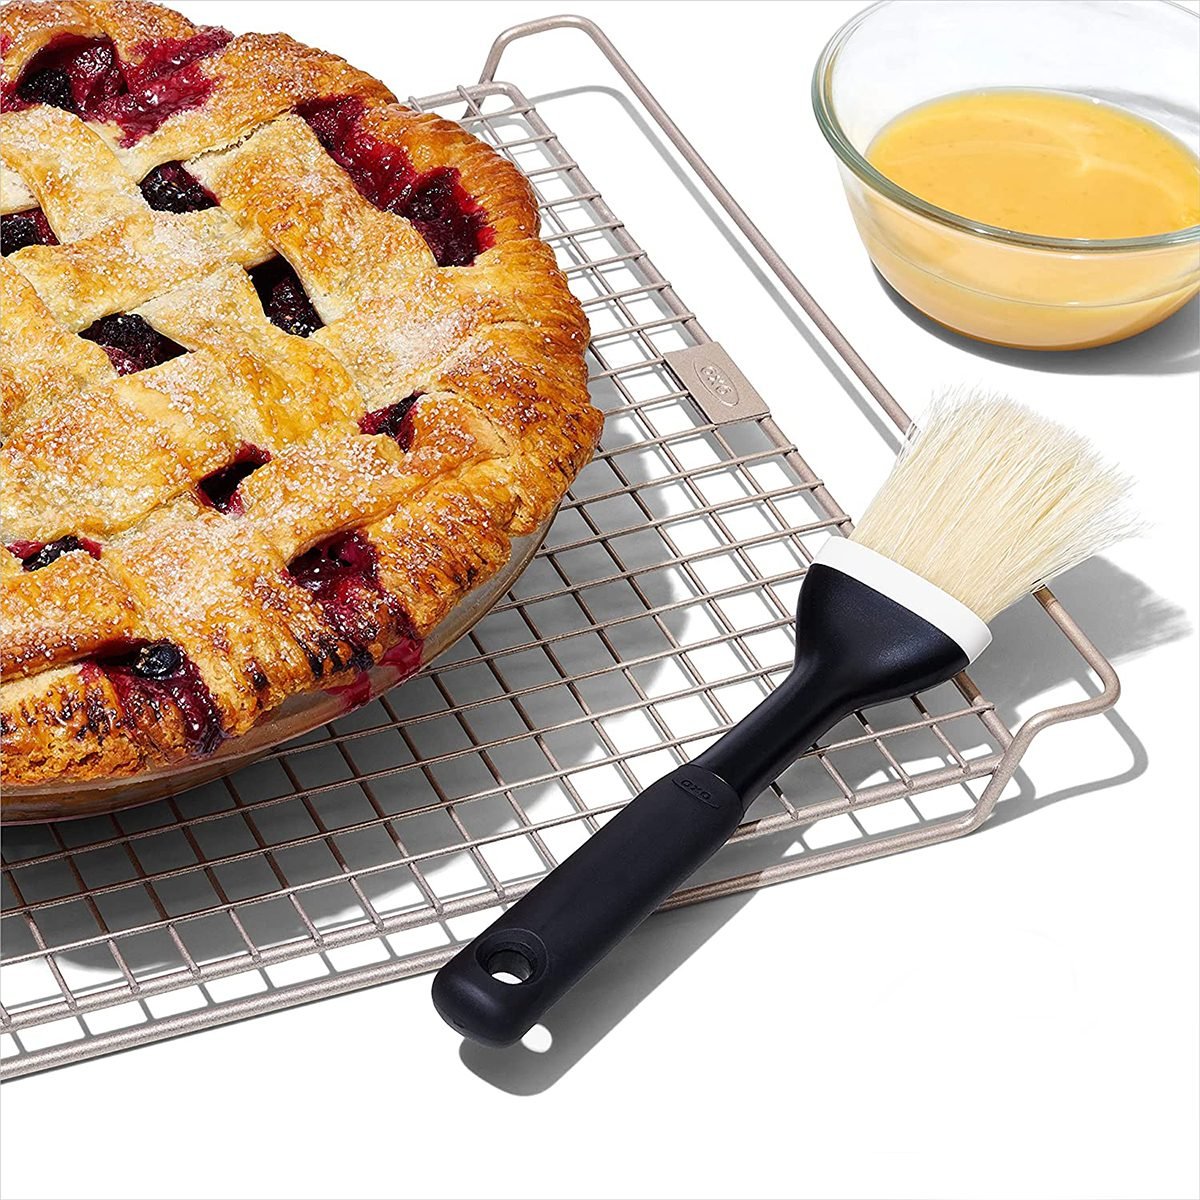 31 Essential Tart and Pie Making Tools Every Home Baker Needs